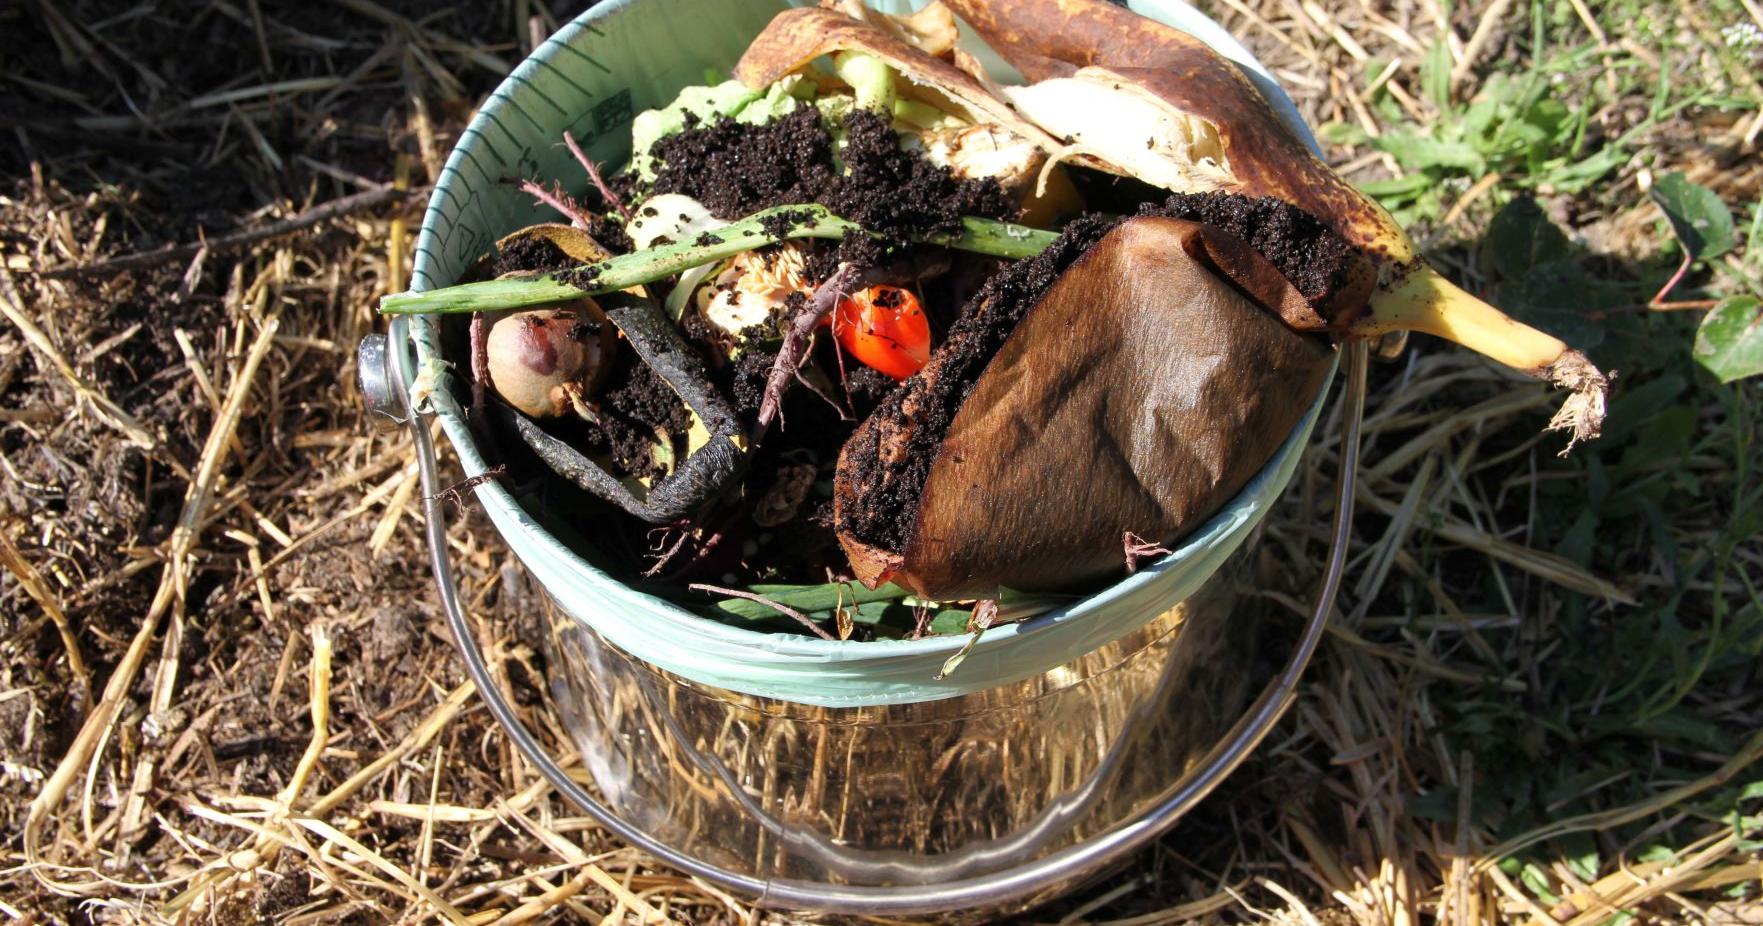 How compost can become worth its weight in garbage